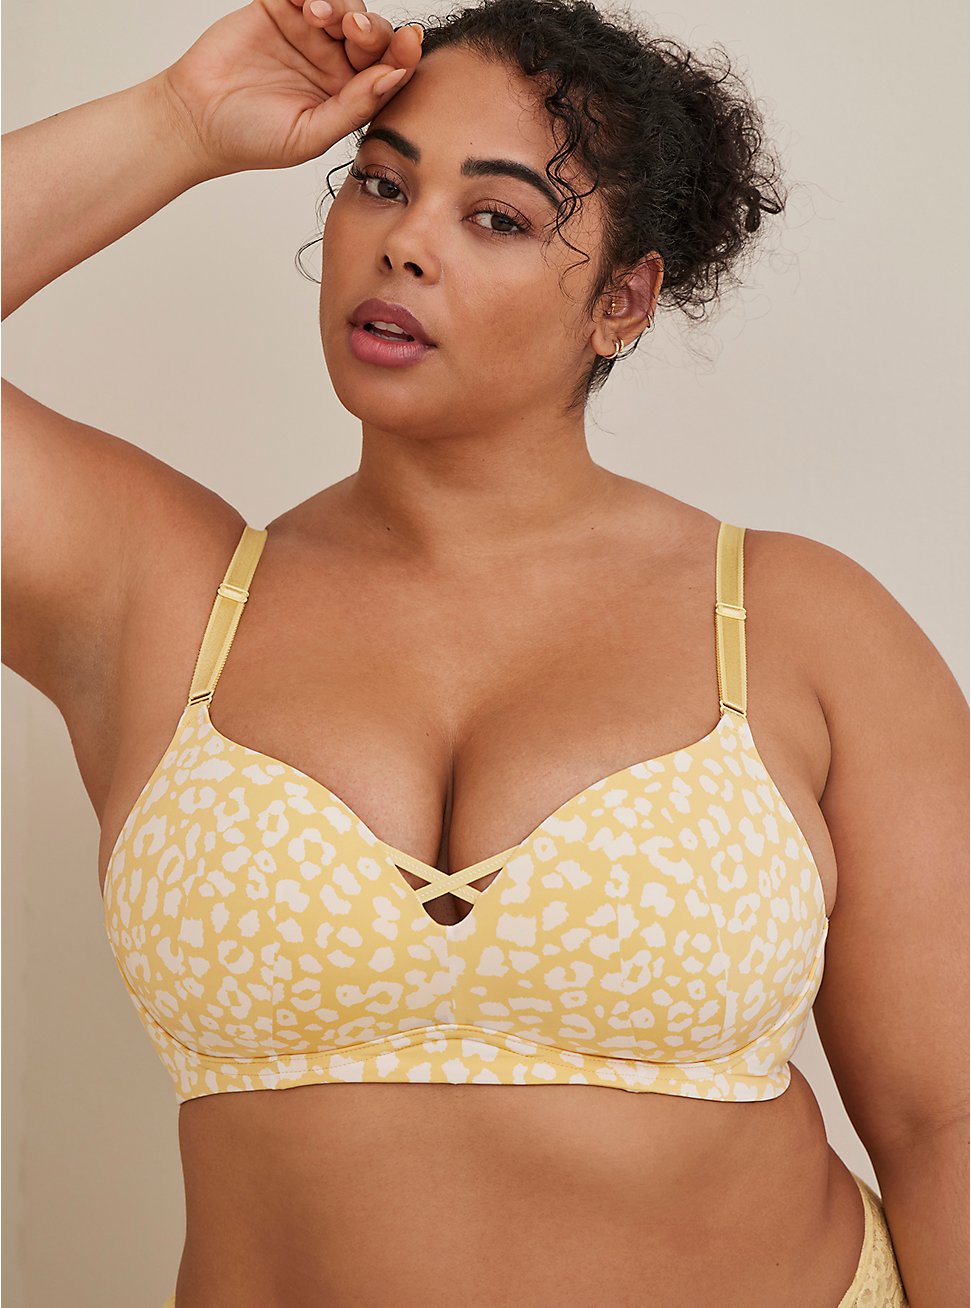 Plus Size Push-Up Wire-Free Bra - Microfiber Leopard Yellow with 360° Back Smoothing™, REAL DEAL LEO, hi-res